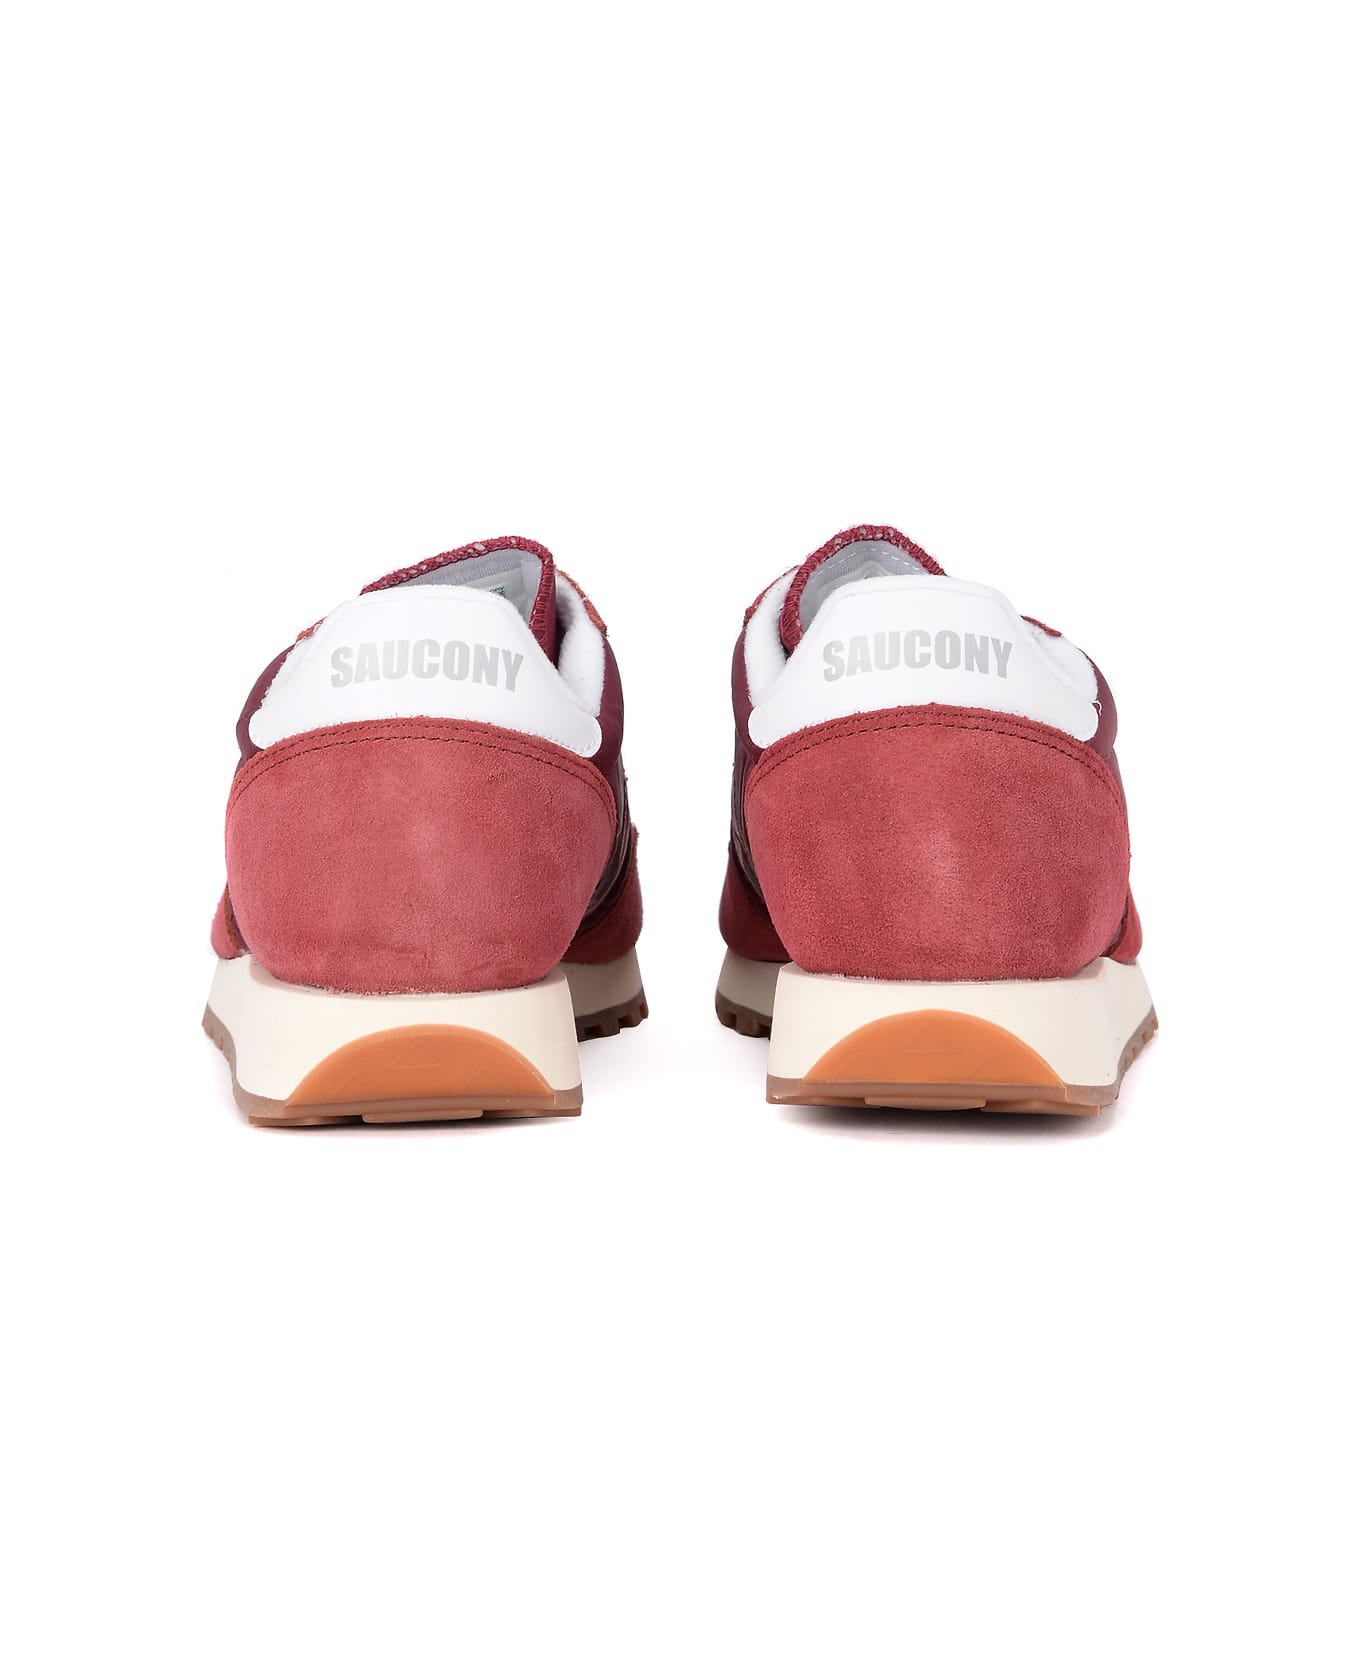 Saucony Jazz Vintage Suede, Fabric And Red Leather Sneaker | italist ...